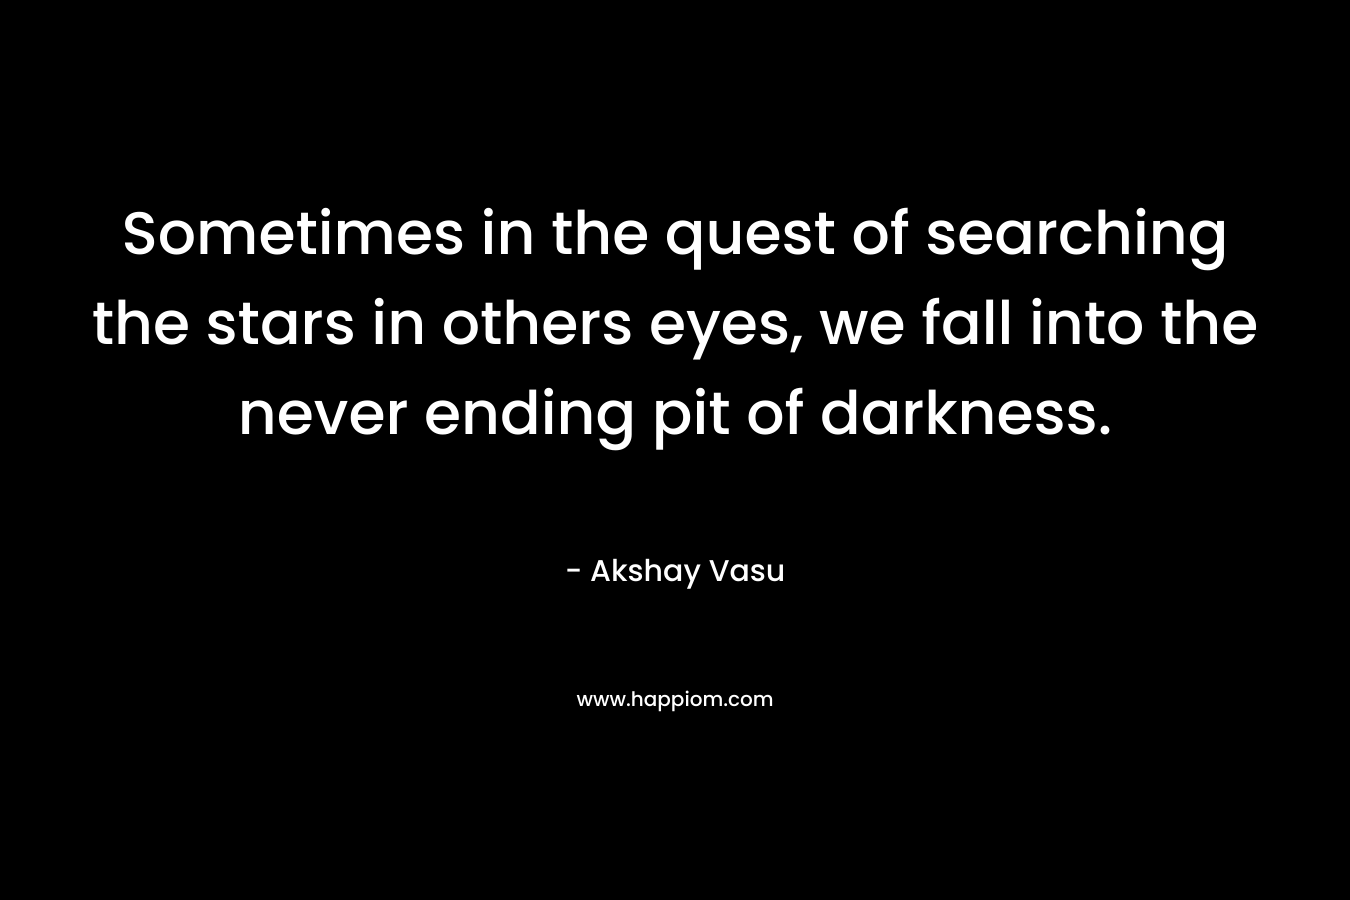 Sometimes in the quest of searching the stars in others eyes, we fall into the never ending pit of darkness.